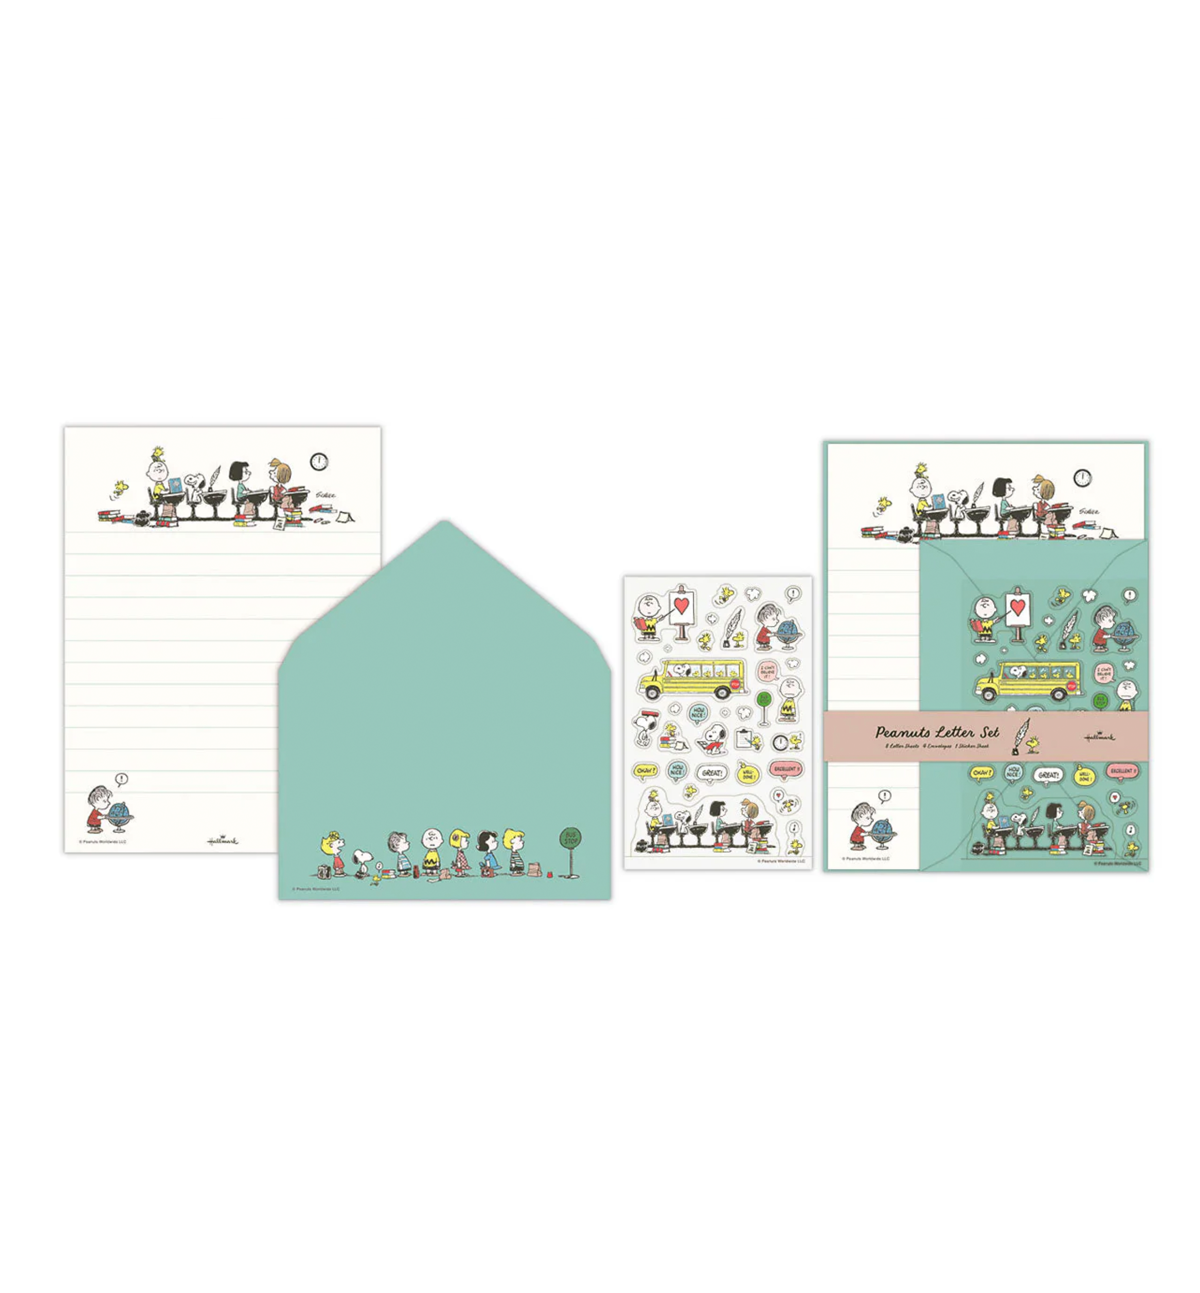 Peanuts Snoopy Stay Positive Letter Set [Green]